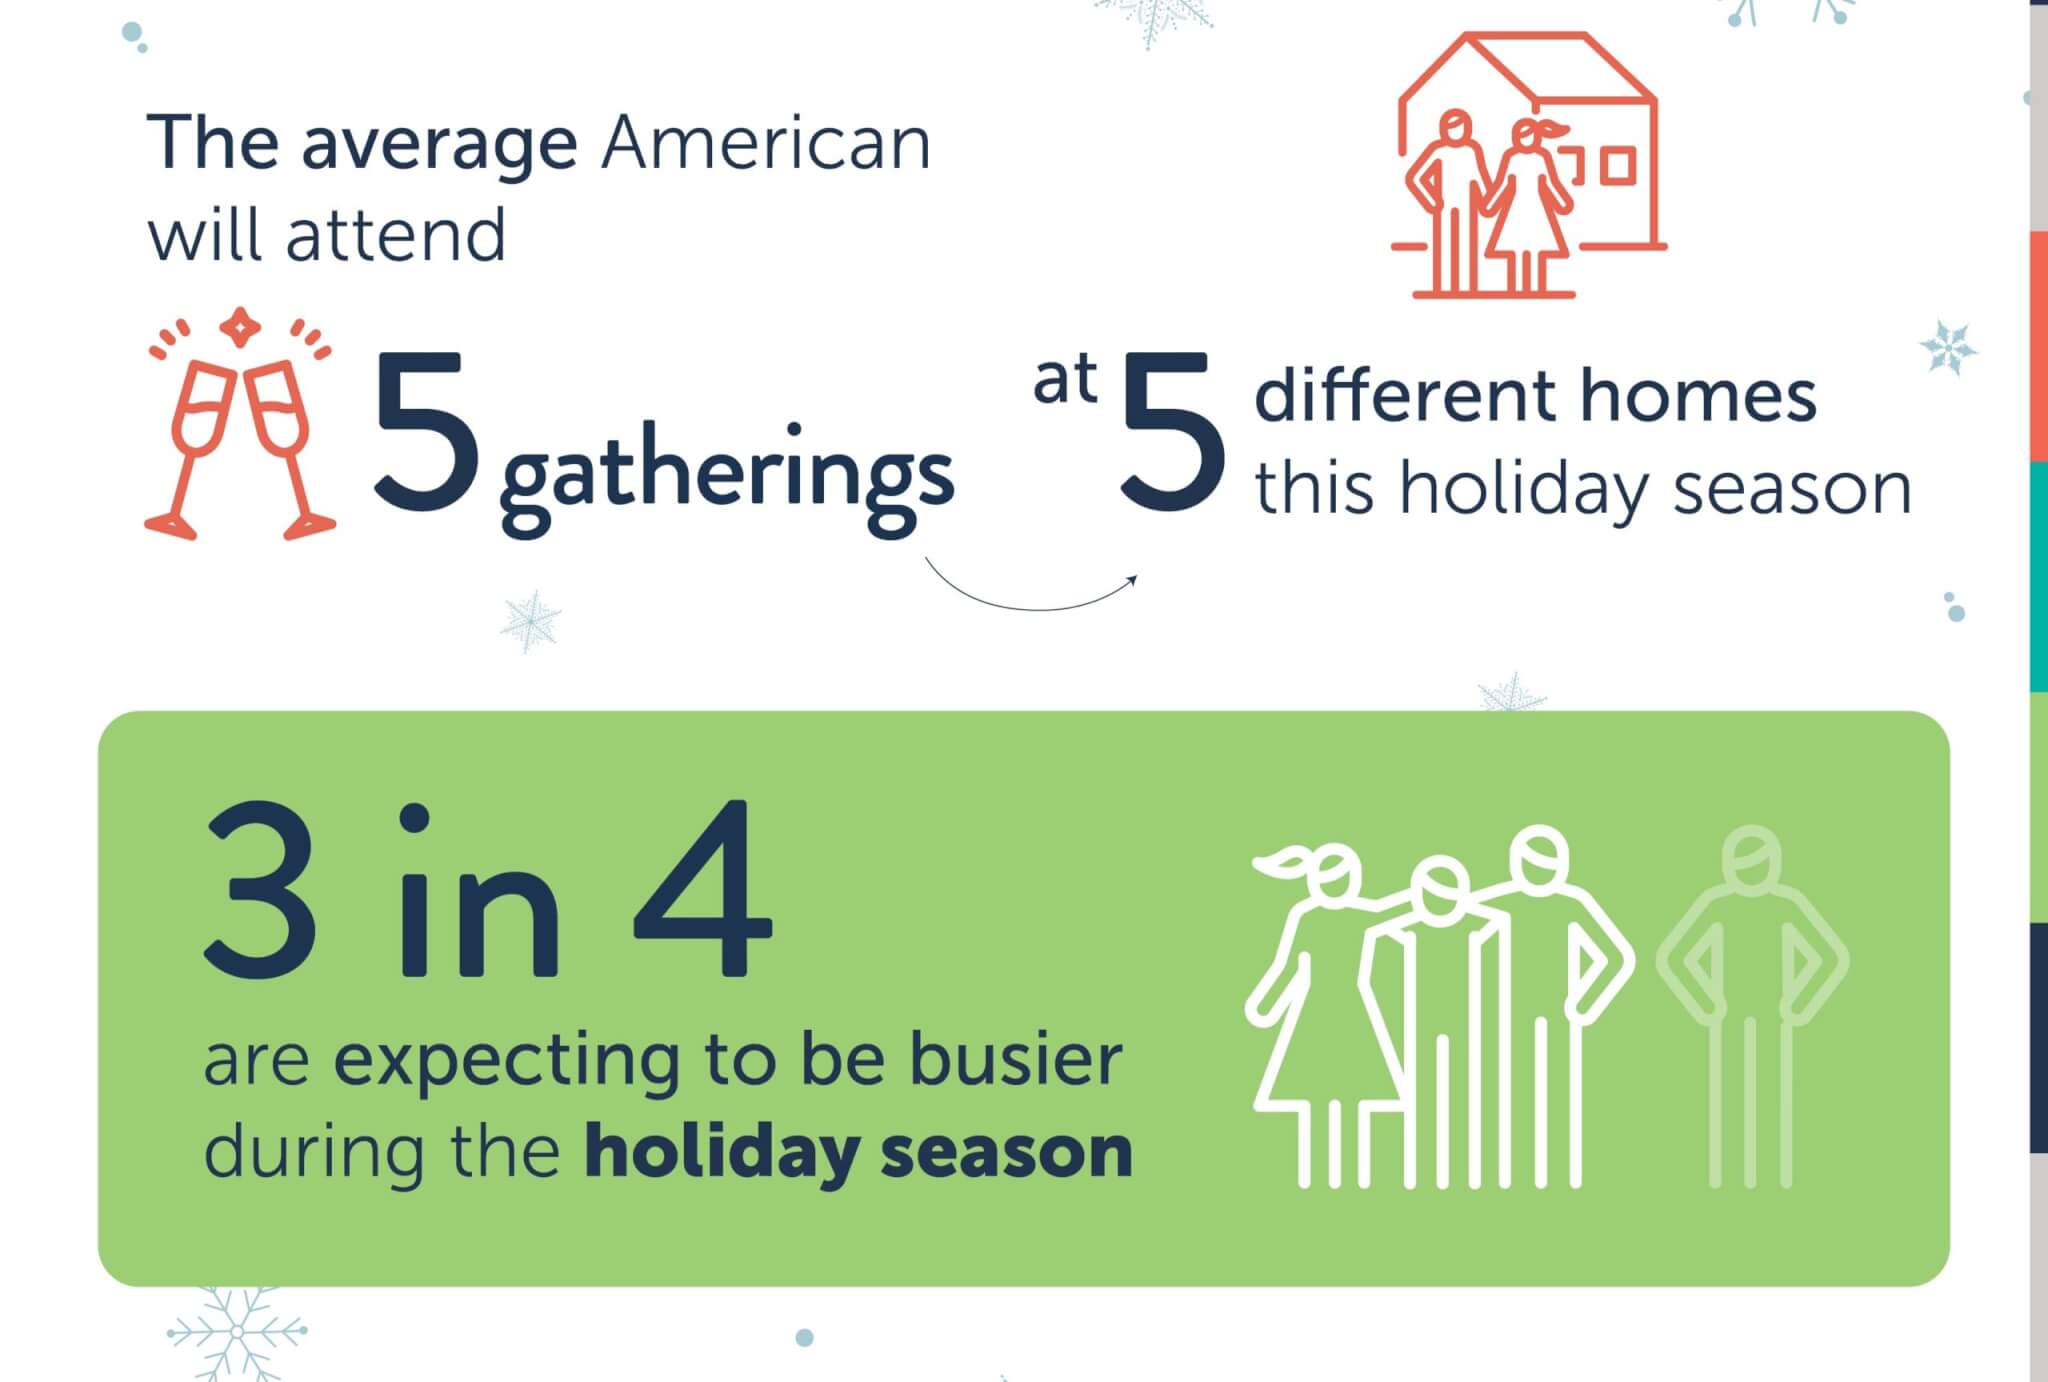 InfographicA survey says people will attend at five different gatherings this holiday season,